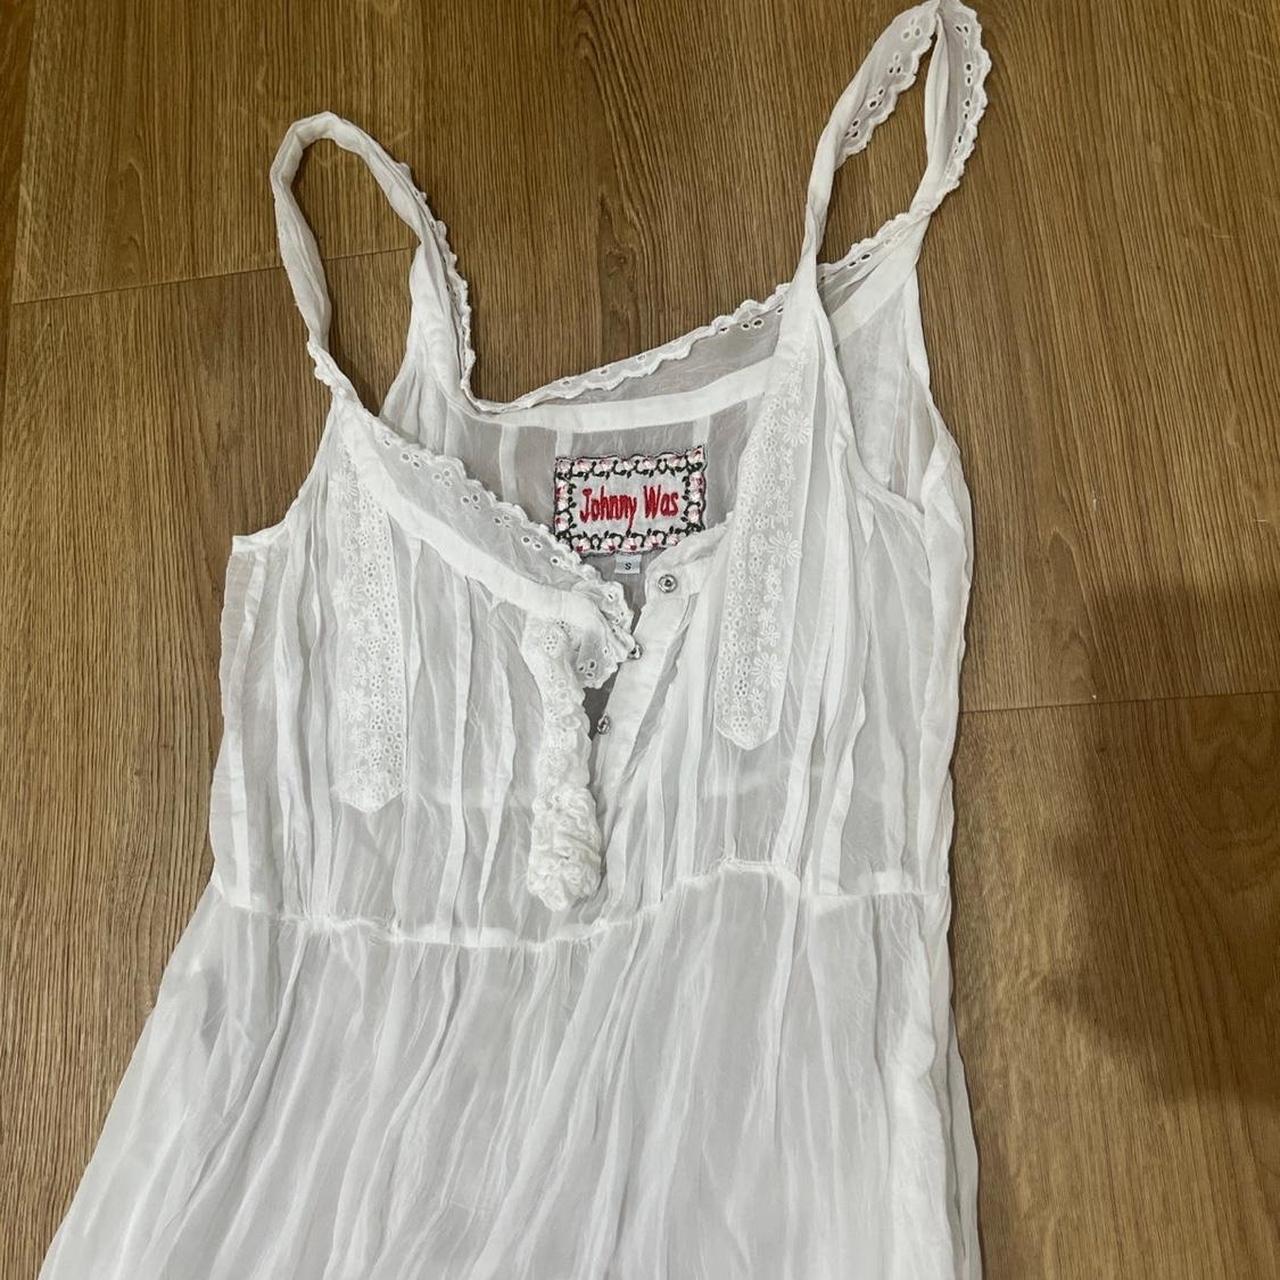 item listed by lilmissresale